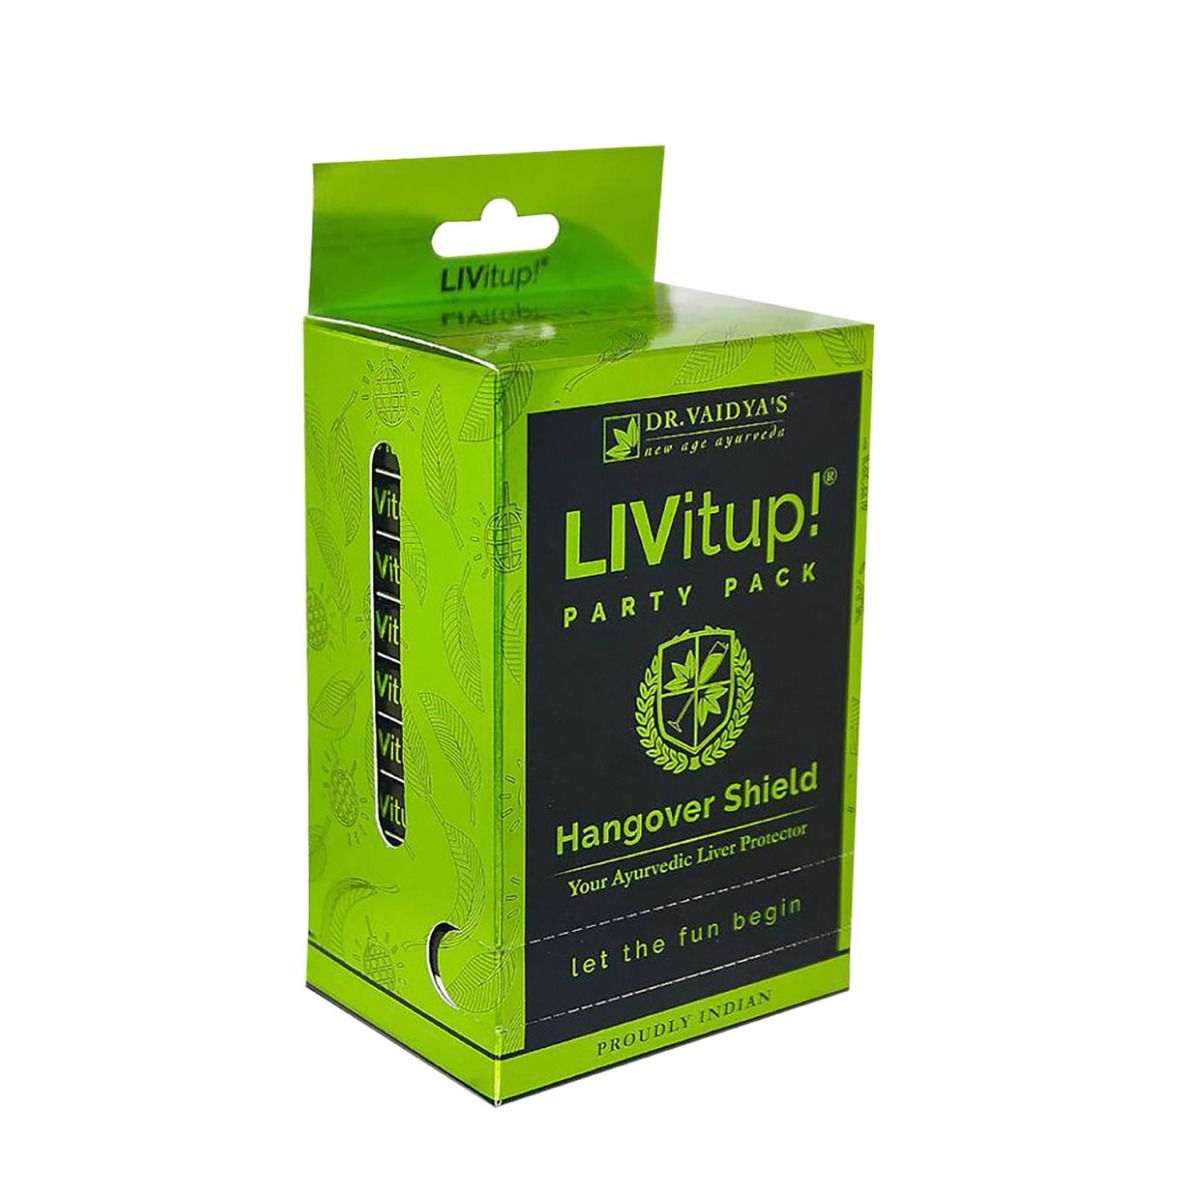 Dr. Vaidya's LIVitup Party Pack, 50 Capsules, Pack of 1 